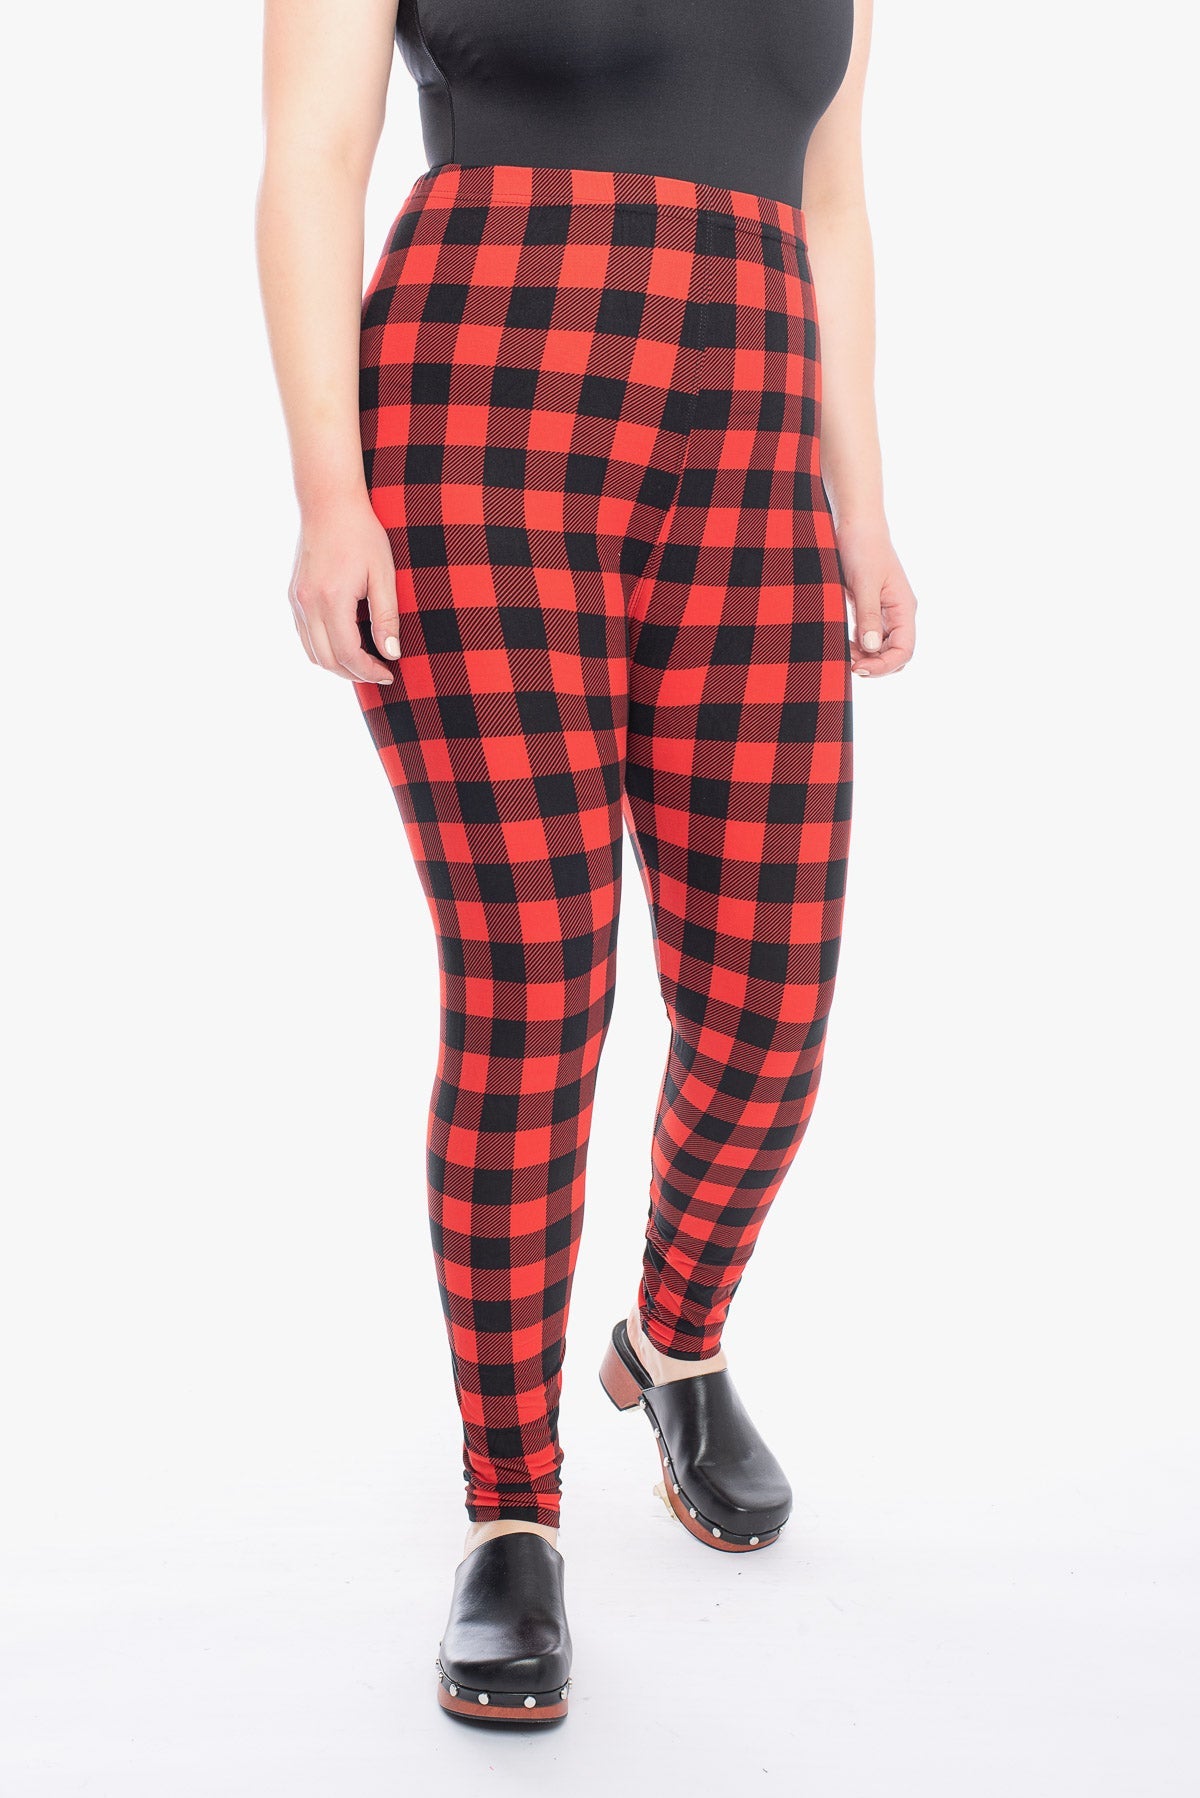 Lilly - red plaid